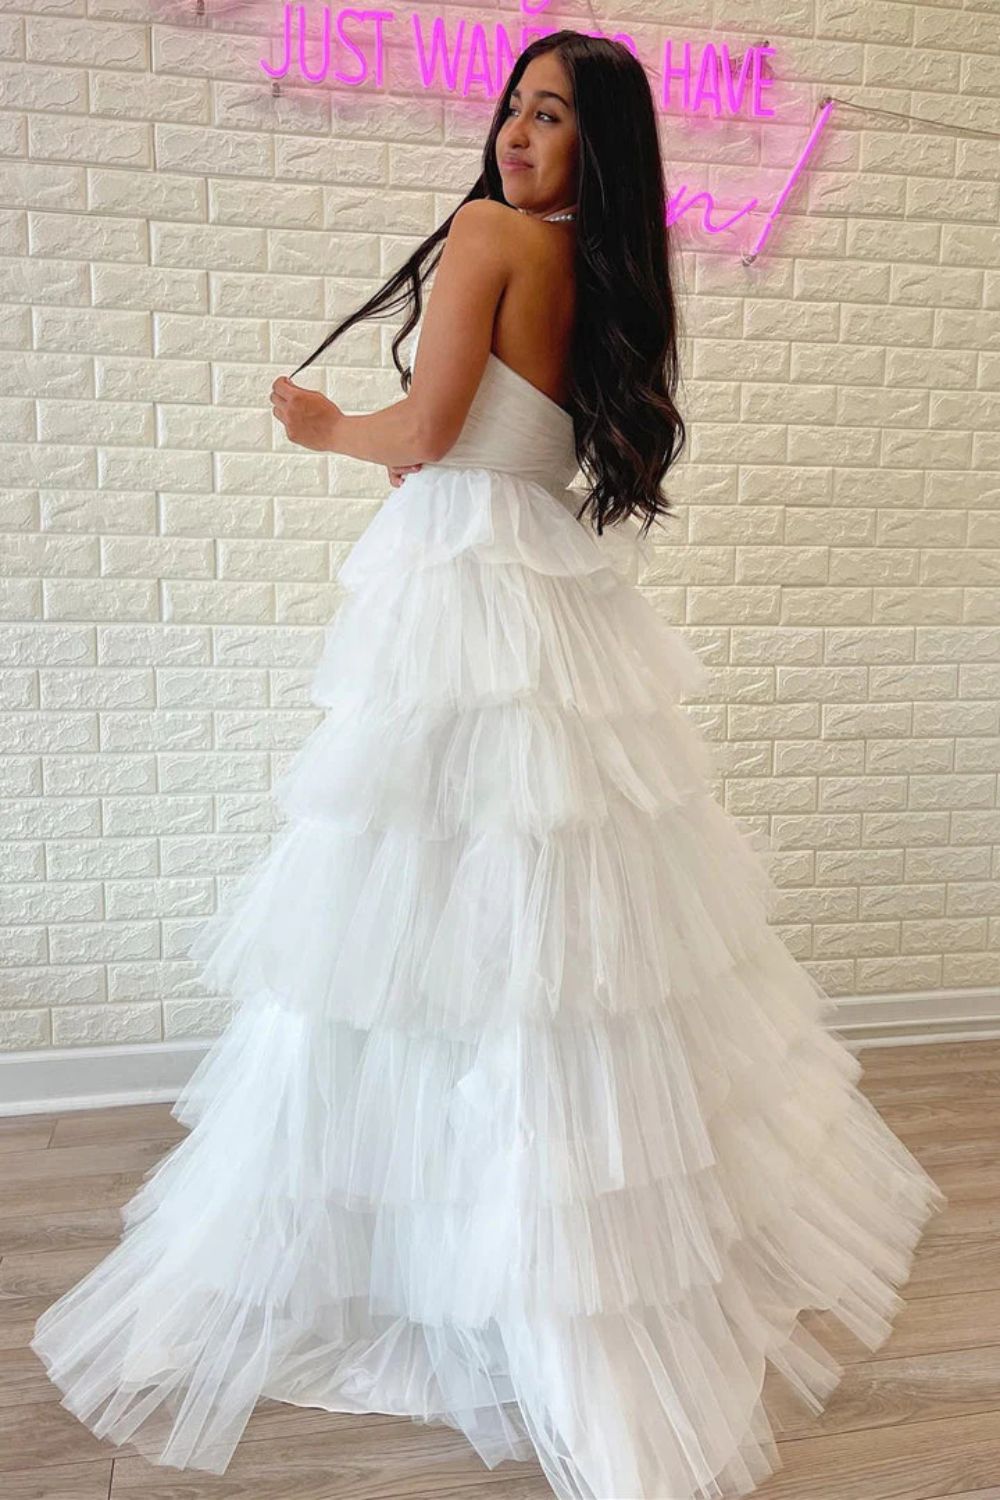 Dressime A-Line Strapless Tiered Tulle Long Prom Dresses